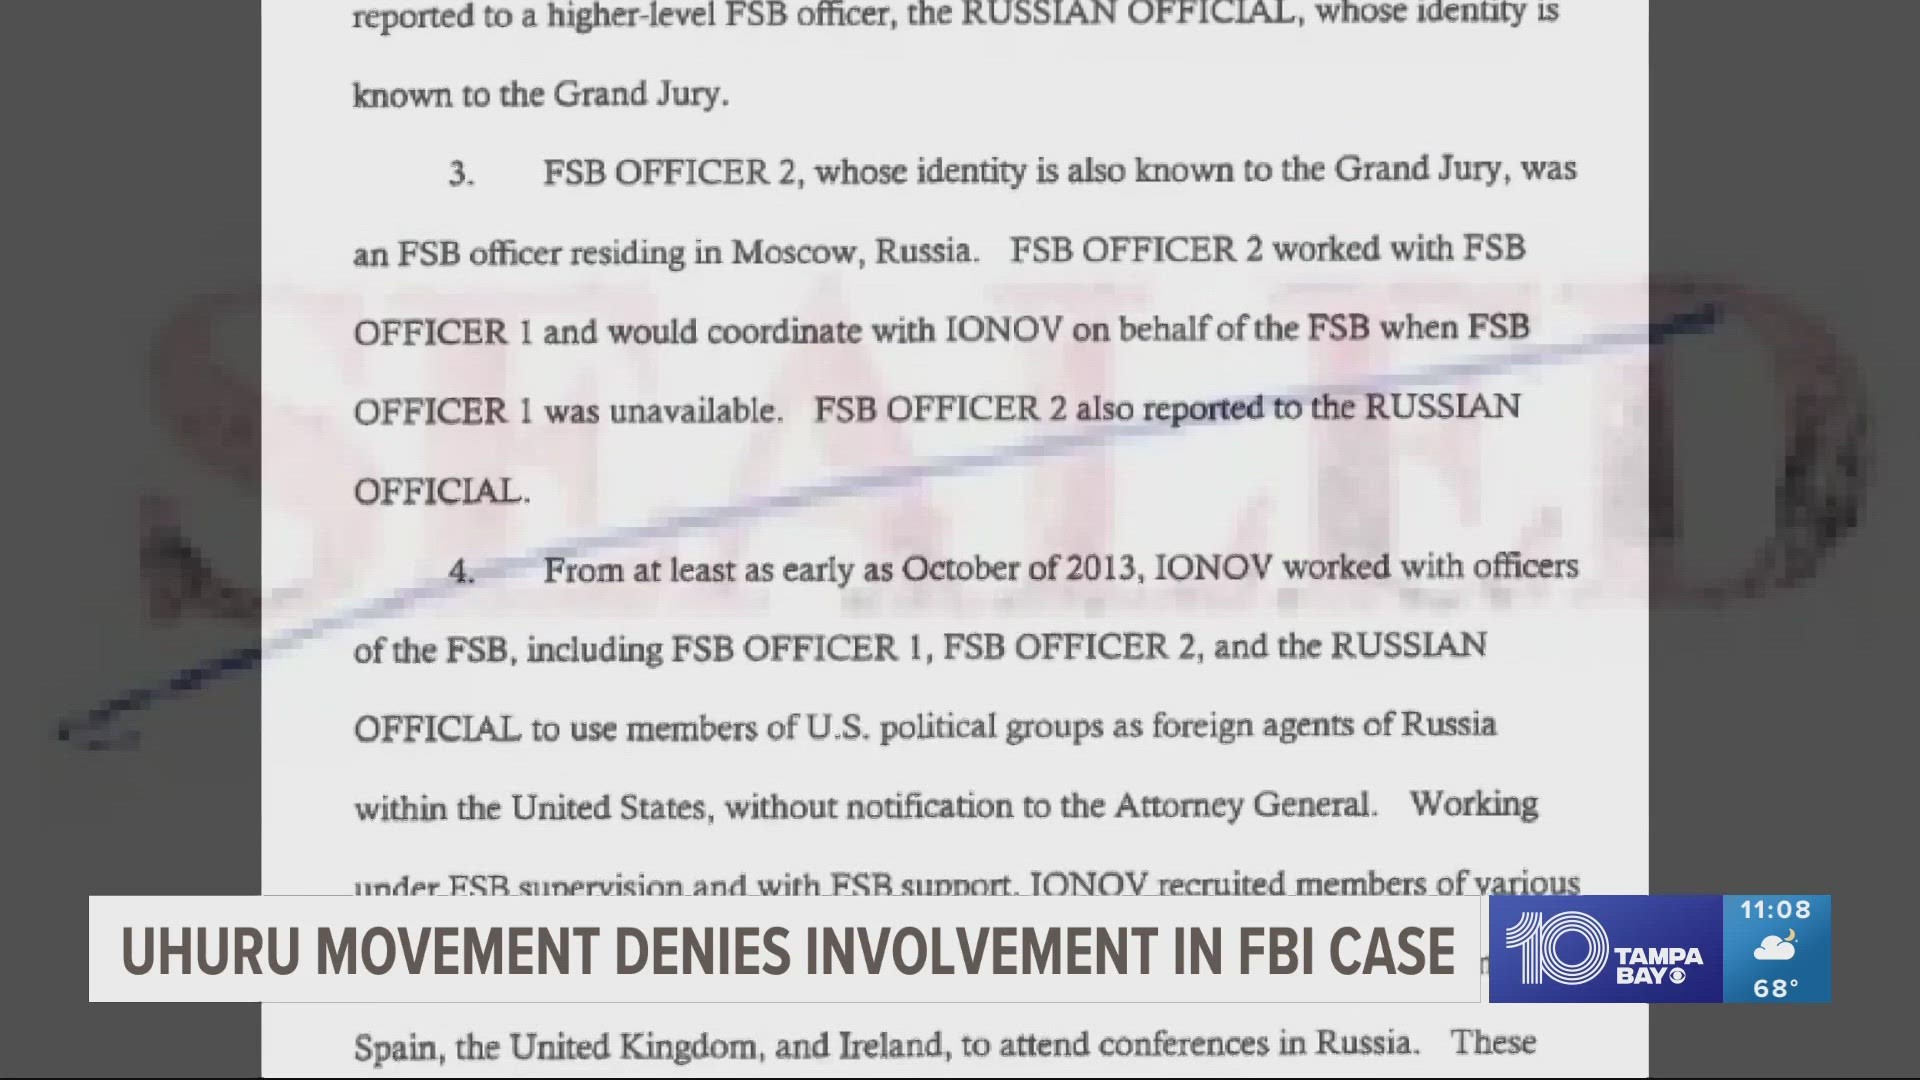 Last July, FBI agents raided the Uhuru House in St. Petersburg and St. Louis after accusing them of spreading pro-Russian propaganda.